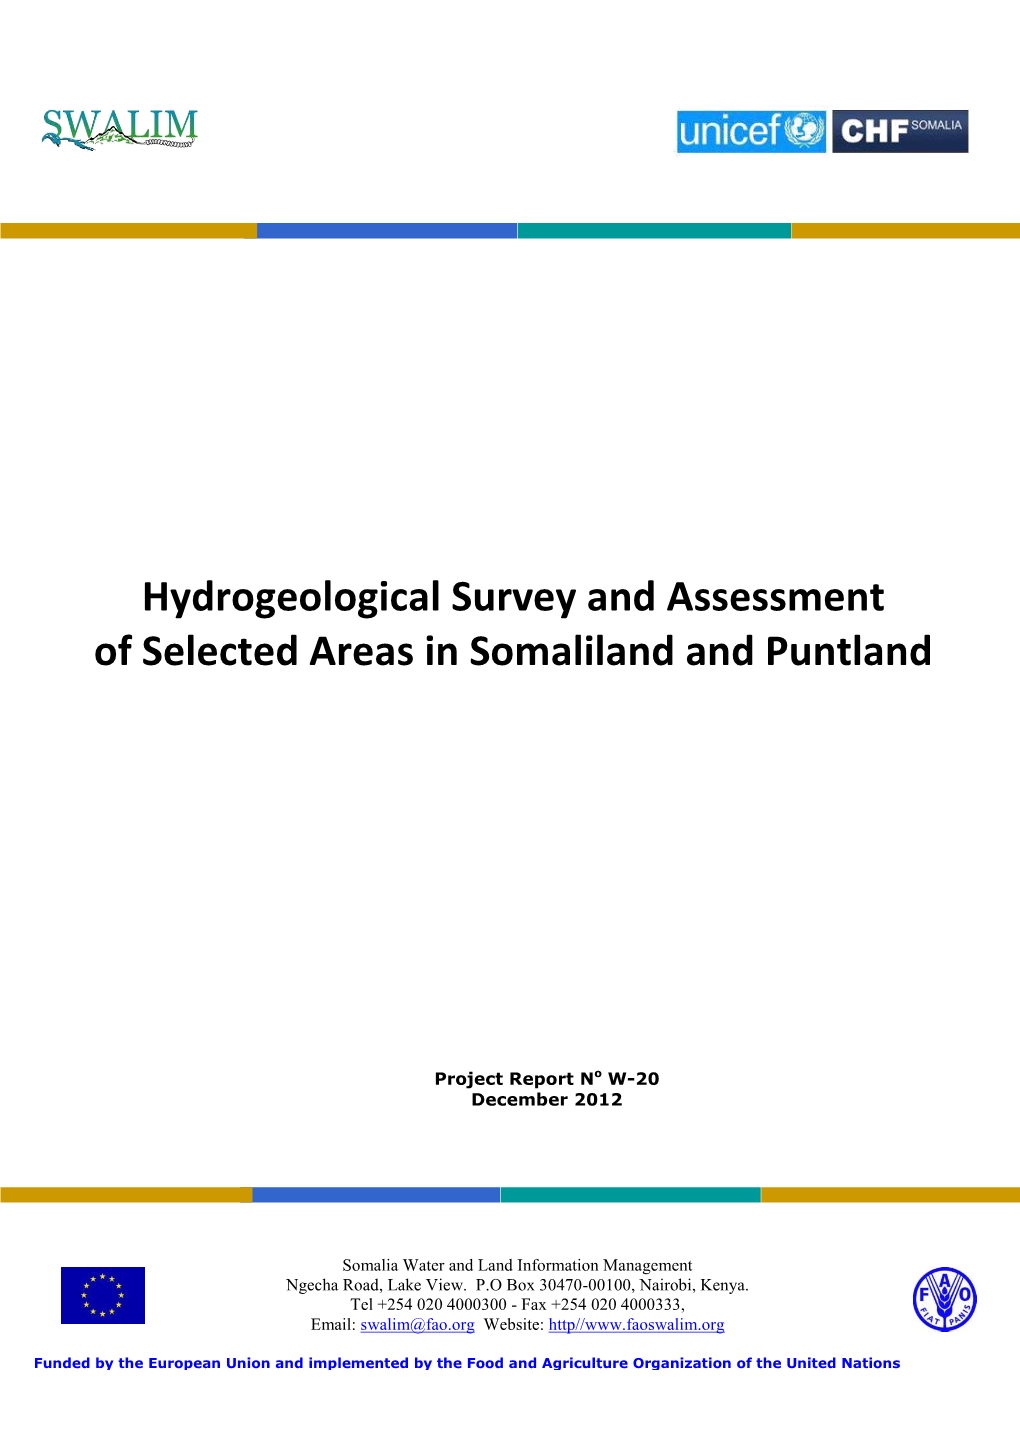 Hydrogeological Survey and Assessment of Selected Areas in Somaliland and Puntland